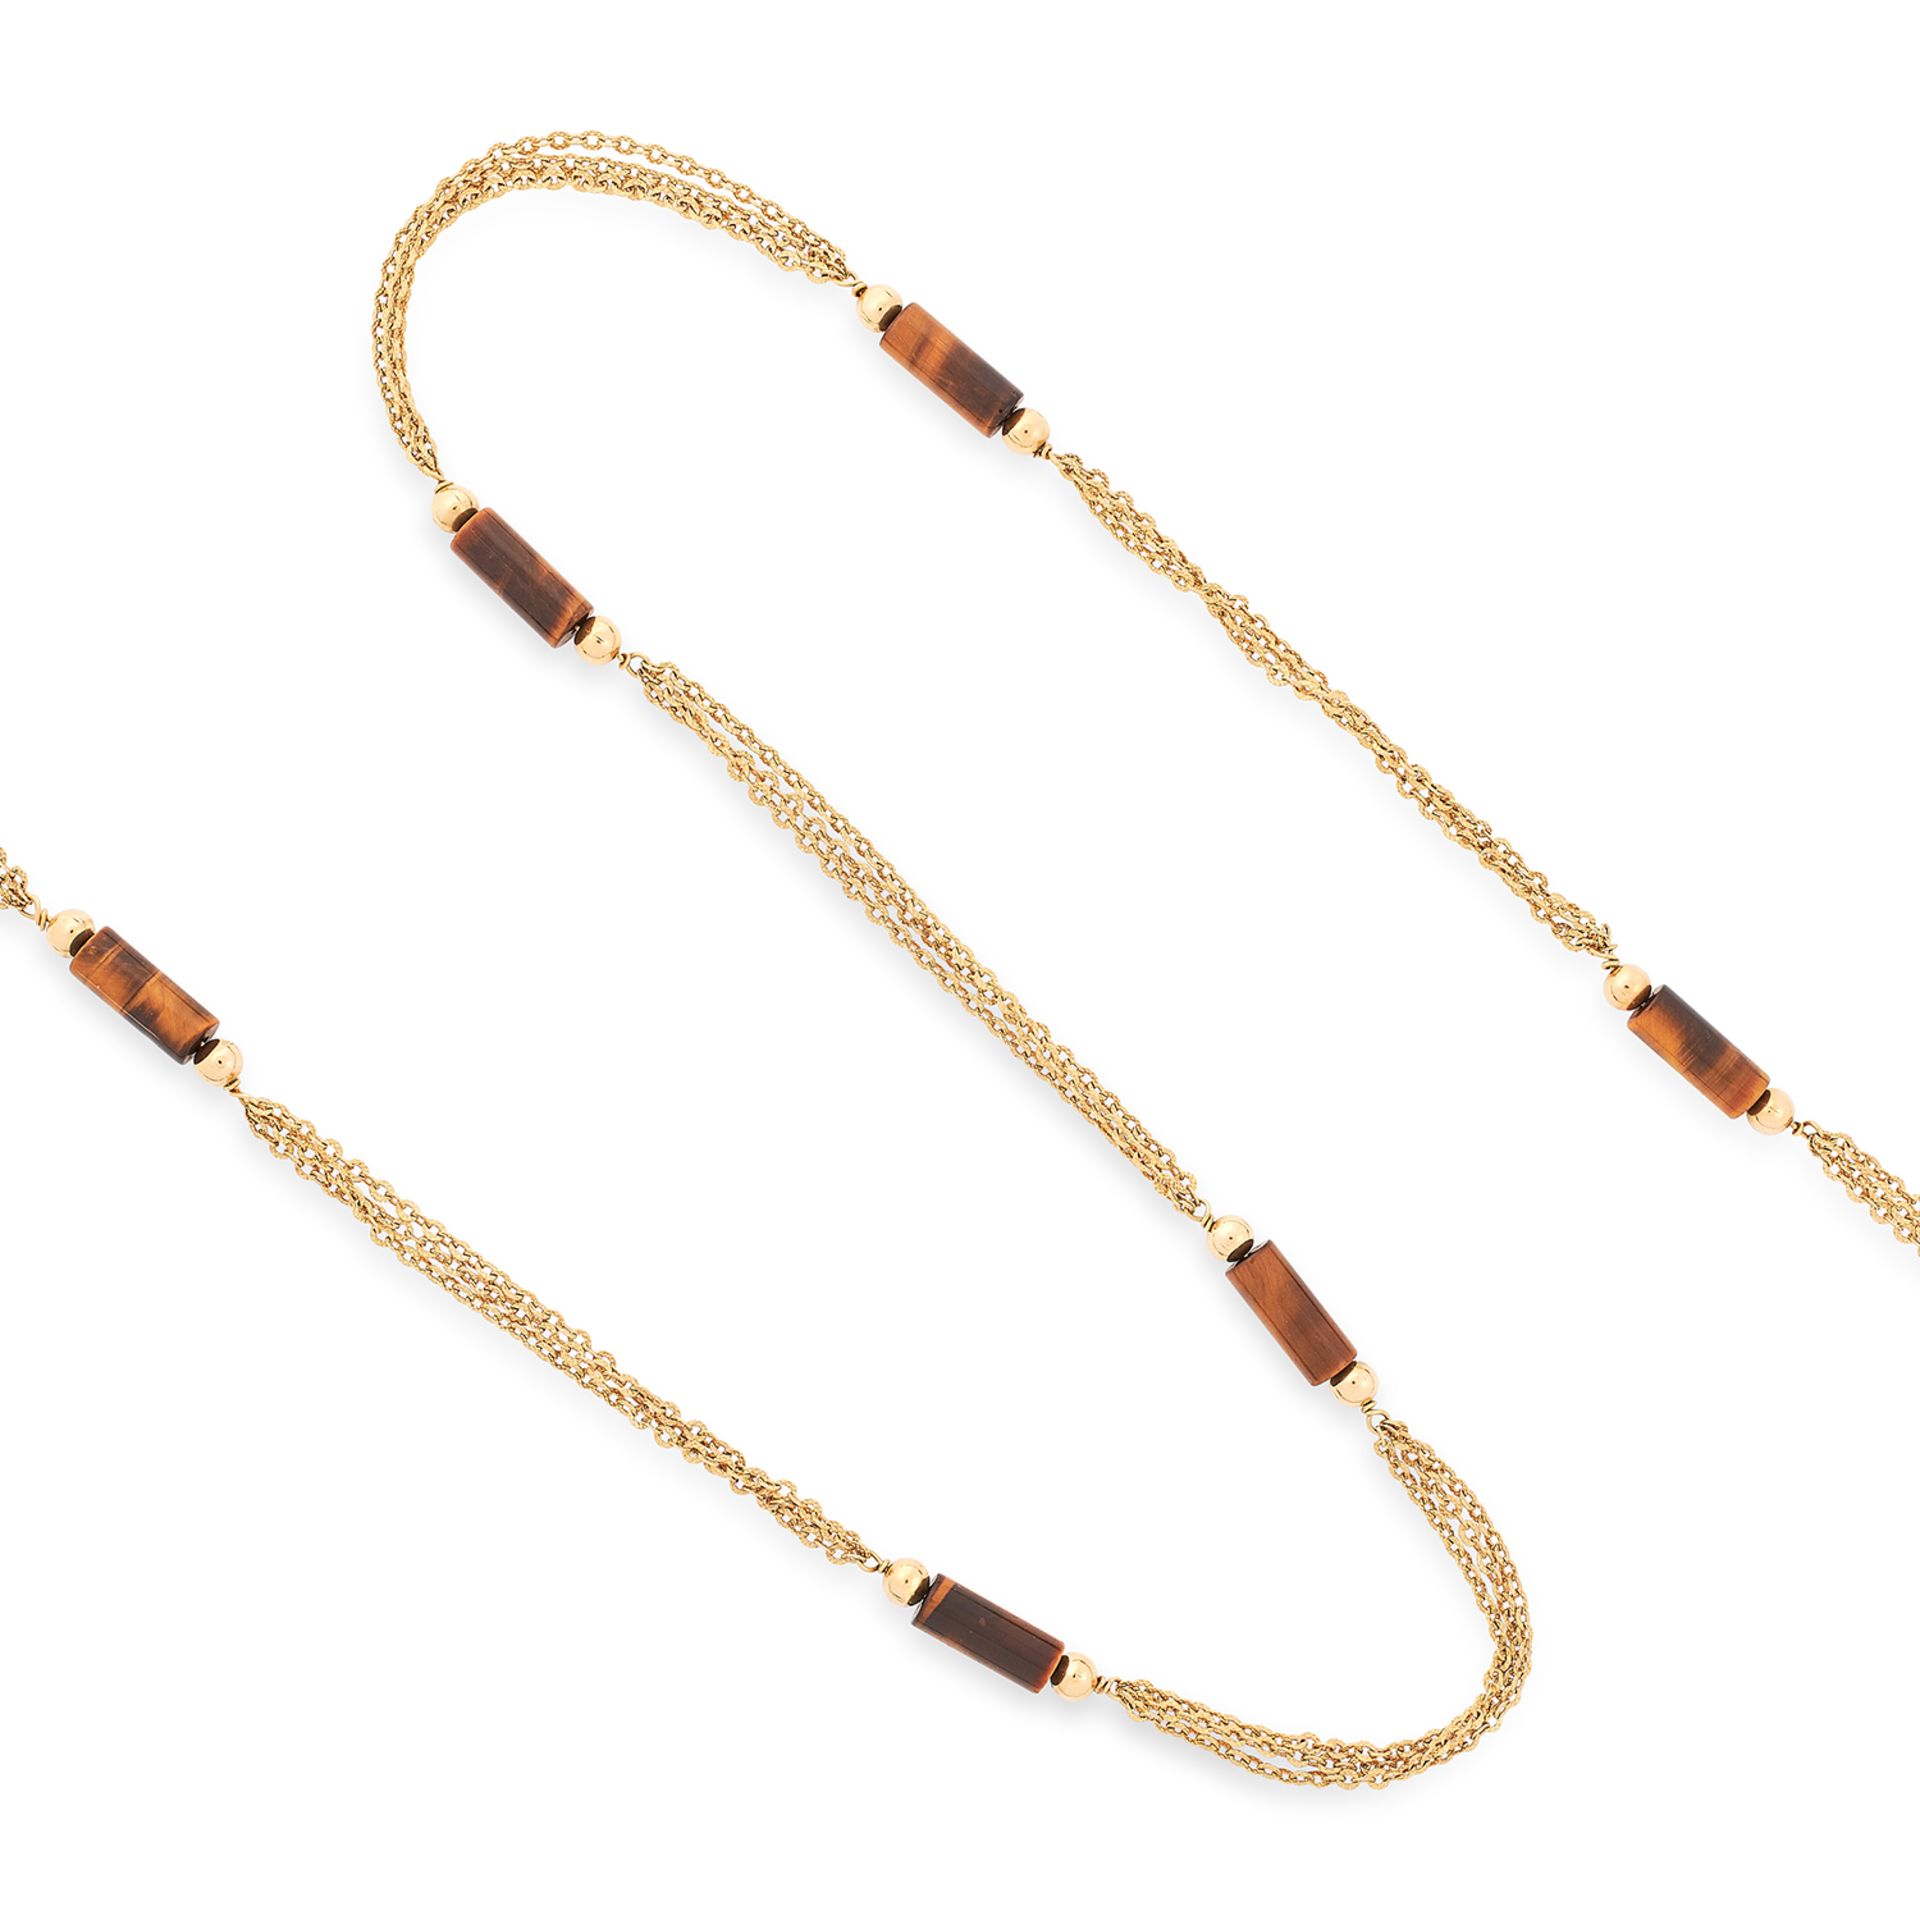 VINTAGE TIGERS EYE SAUTOIR NECKLACE set with polished batons of tigers eye, 87.2cm, 33.4g.